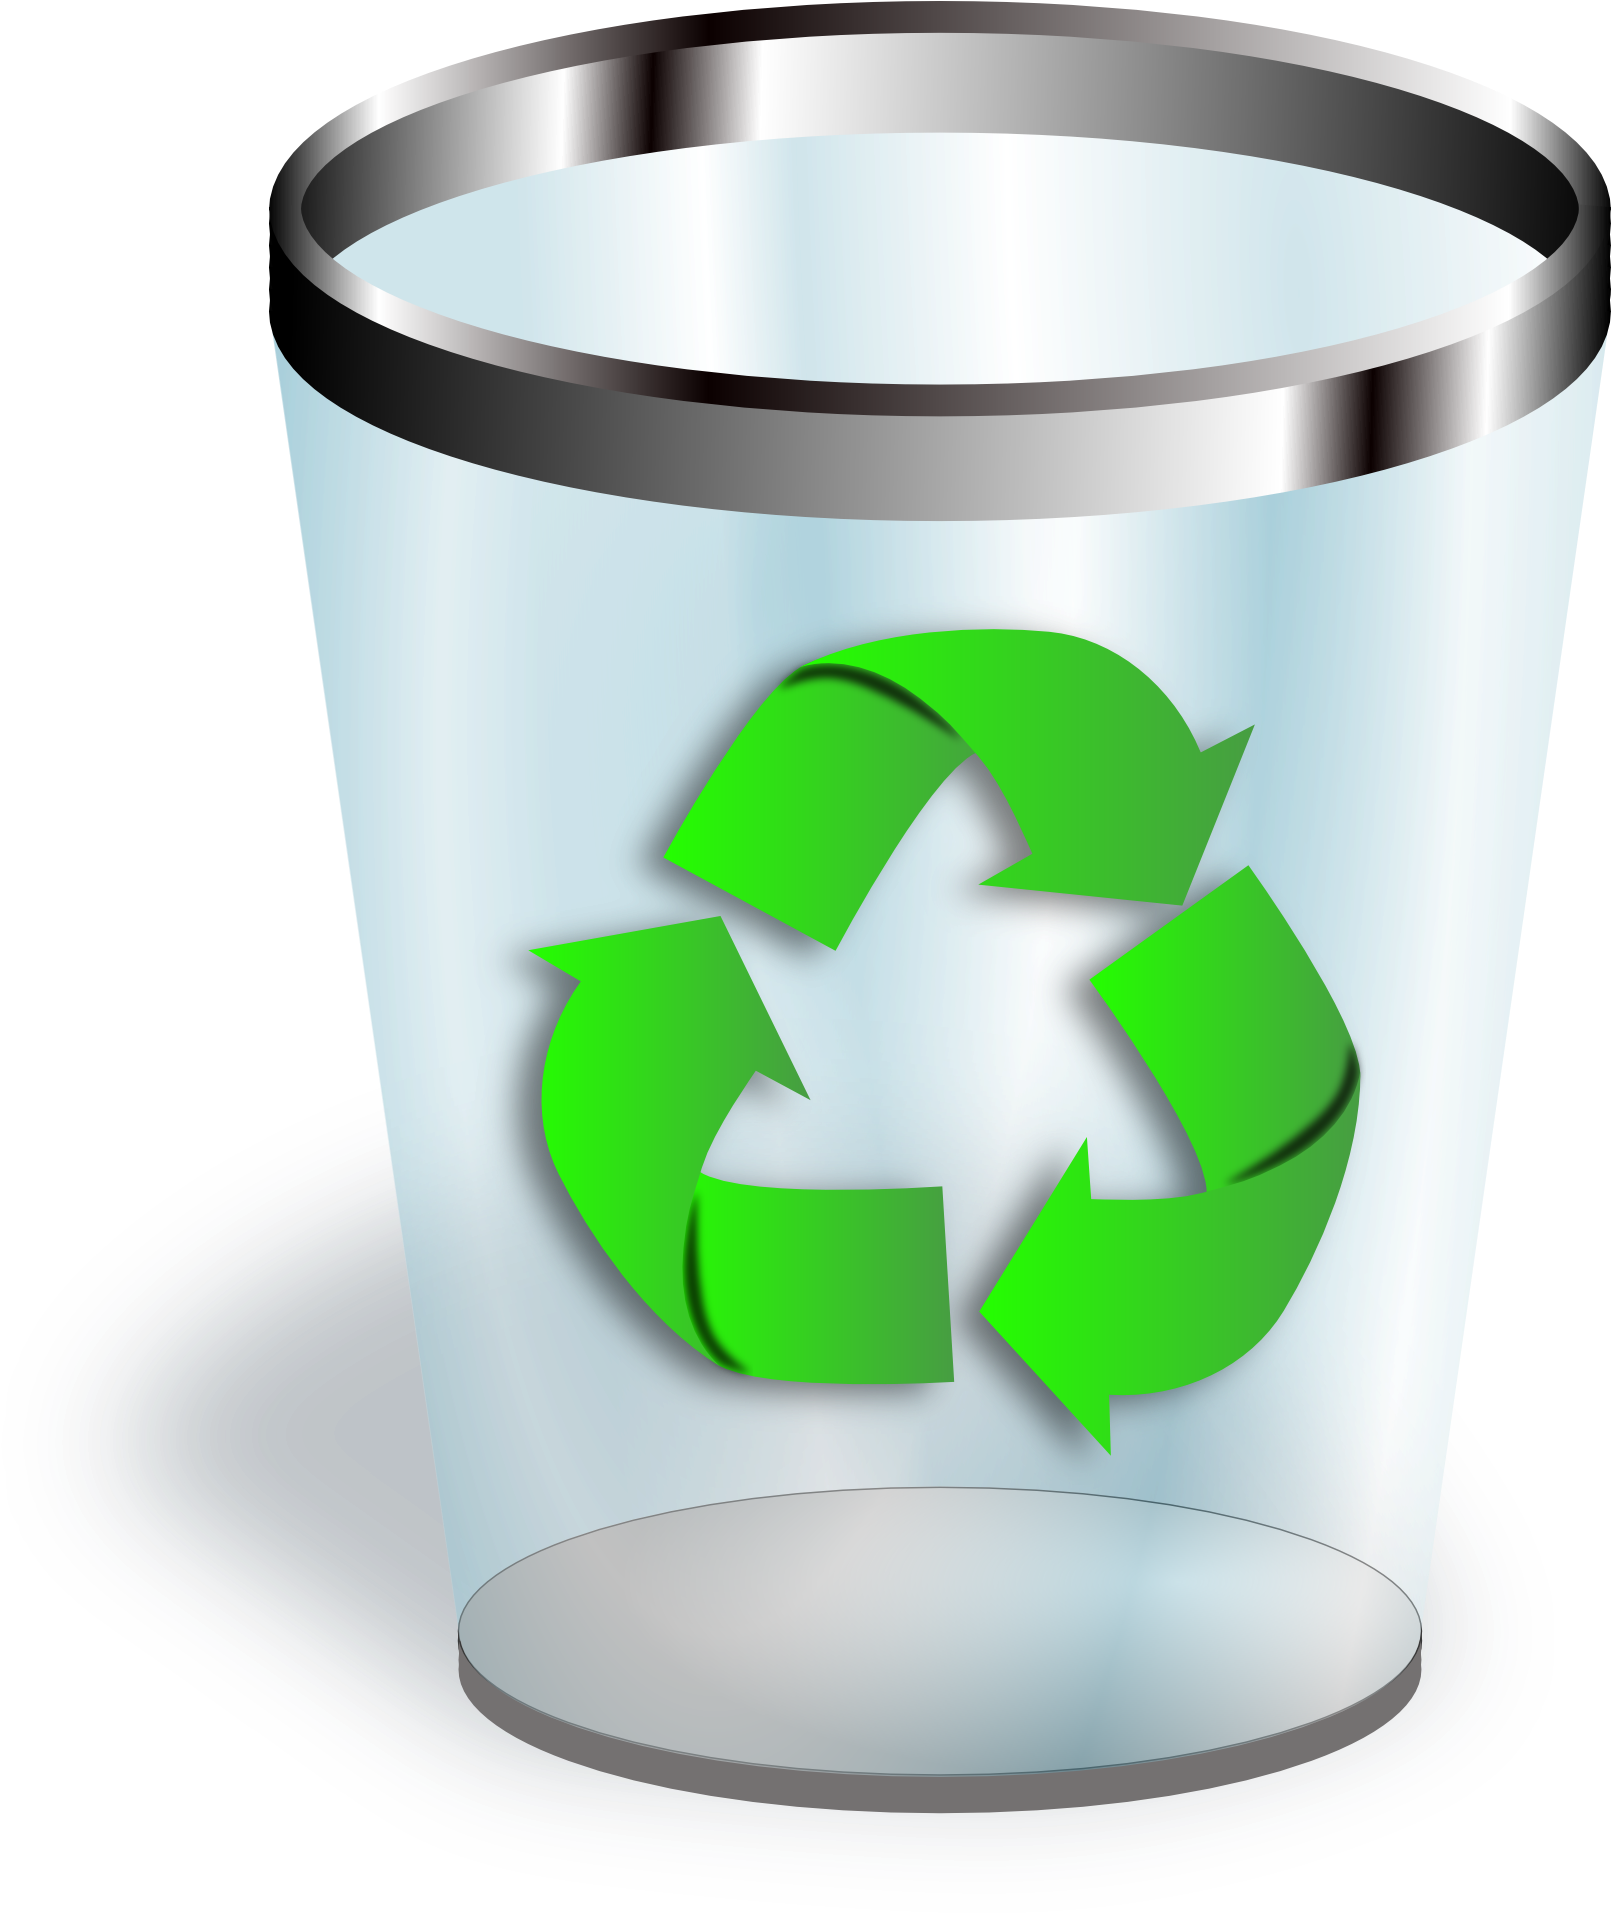 Recycle Bin Icon PNG